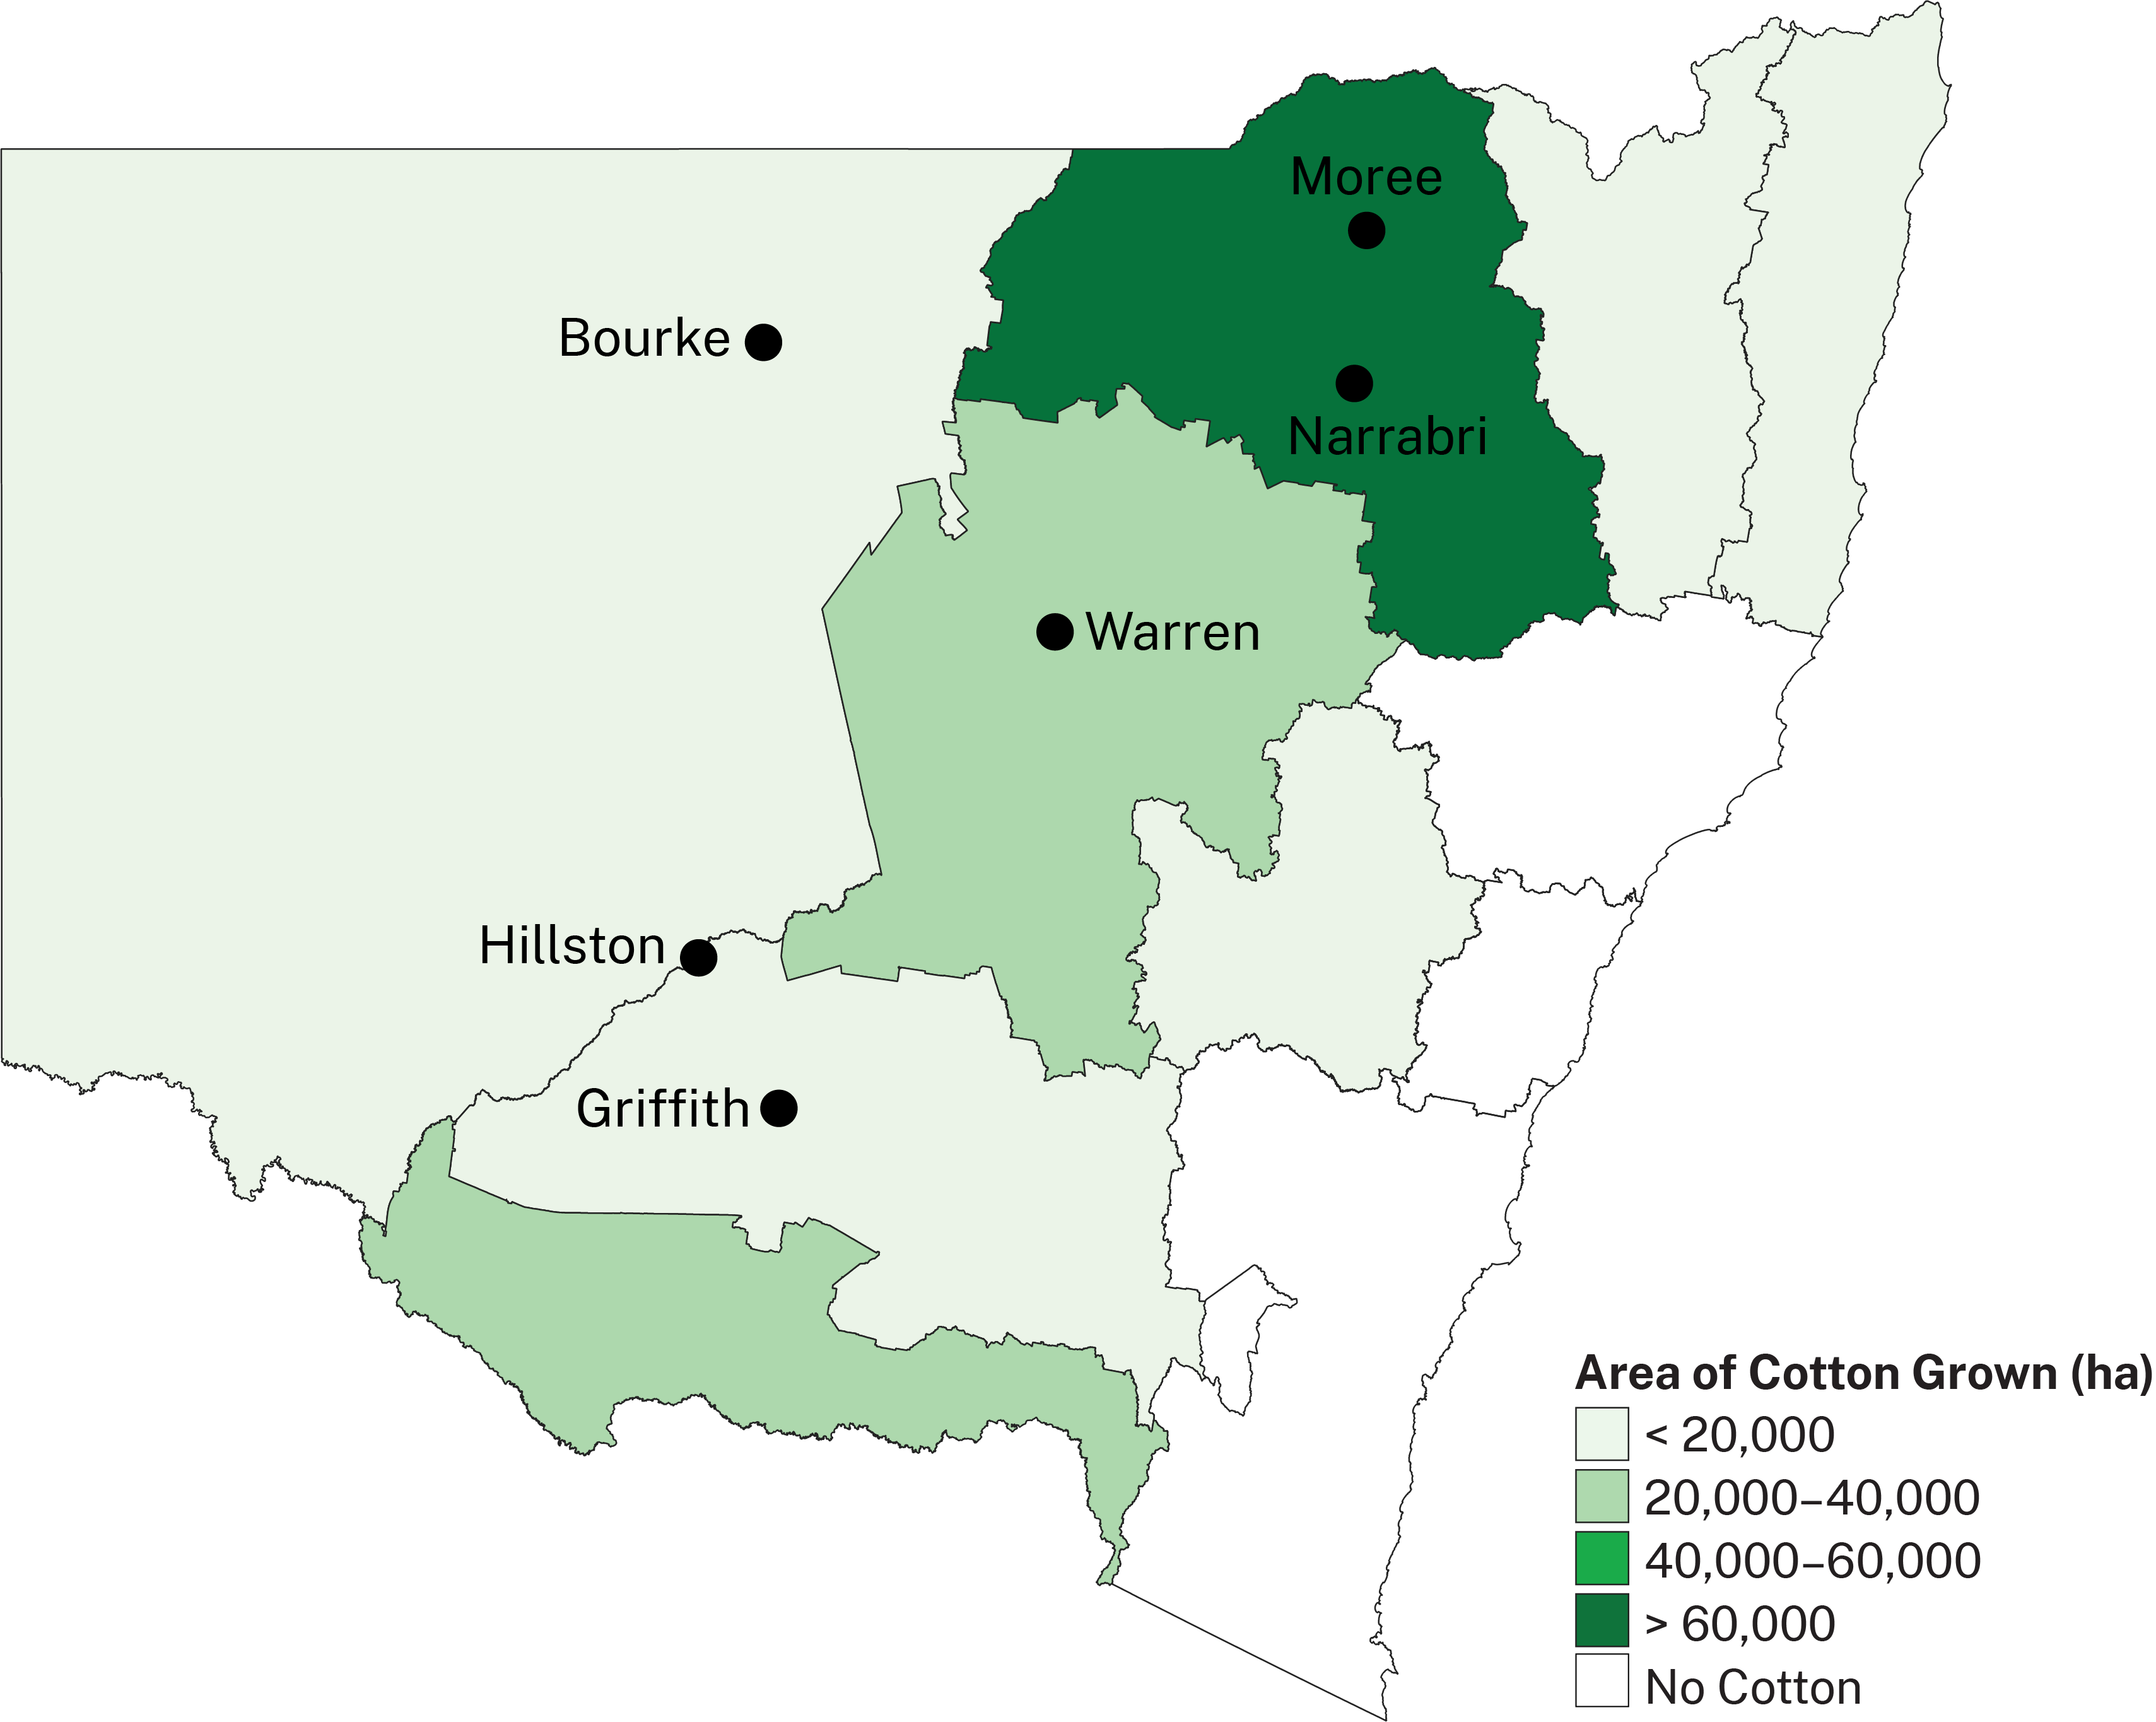 Cotton is grown across much of NSW, concentrated in the north and central regions of the state.